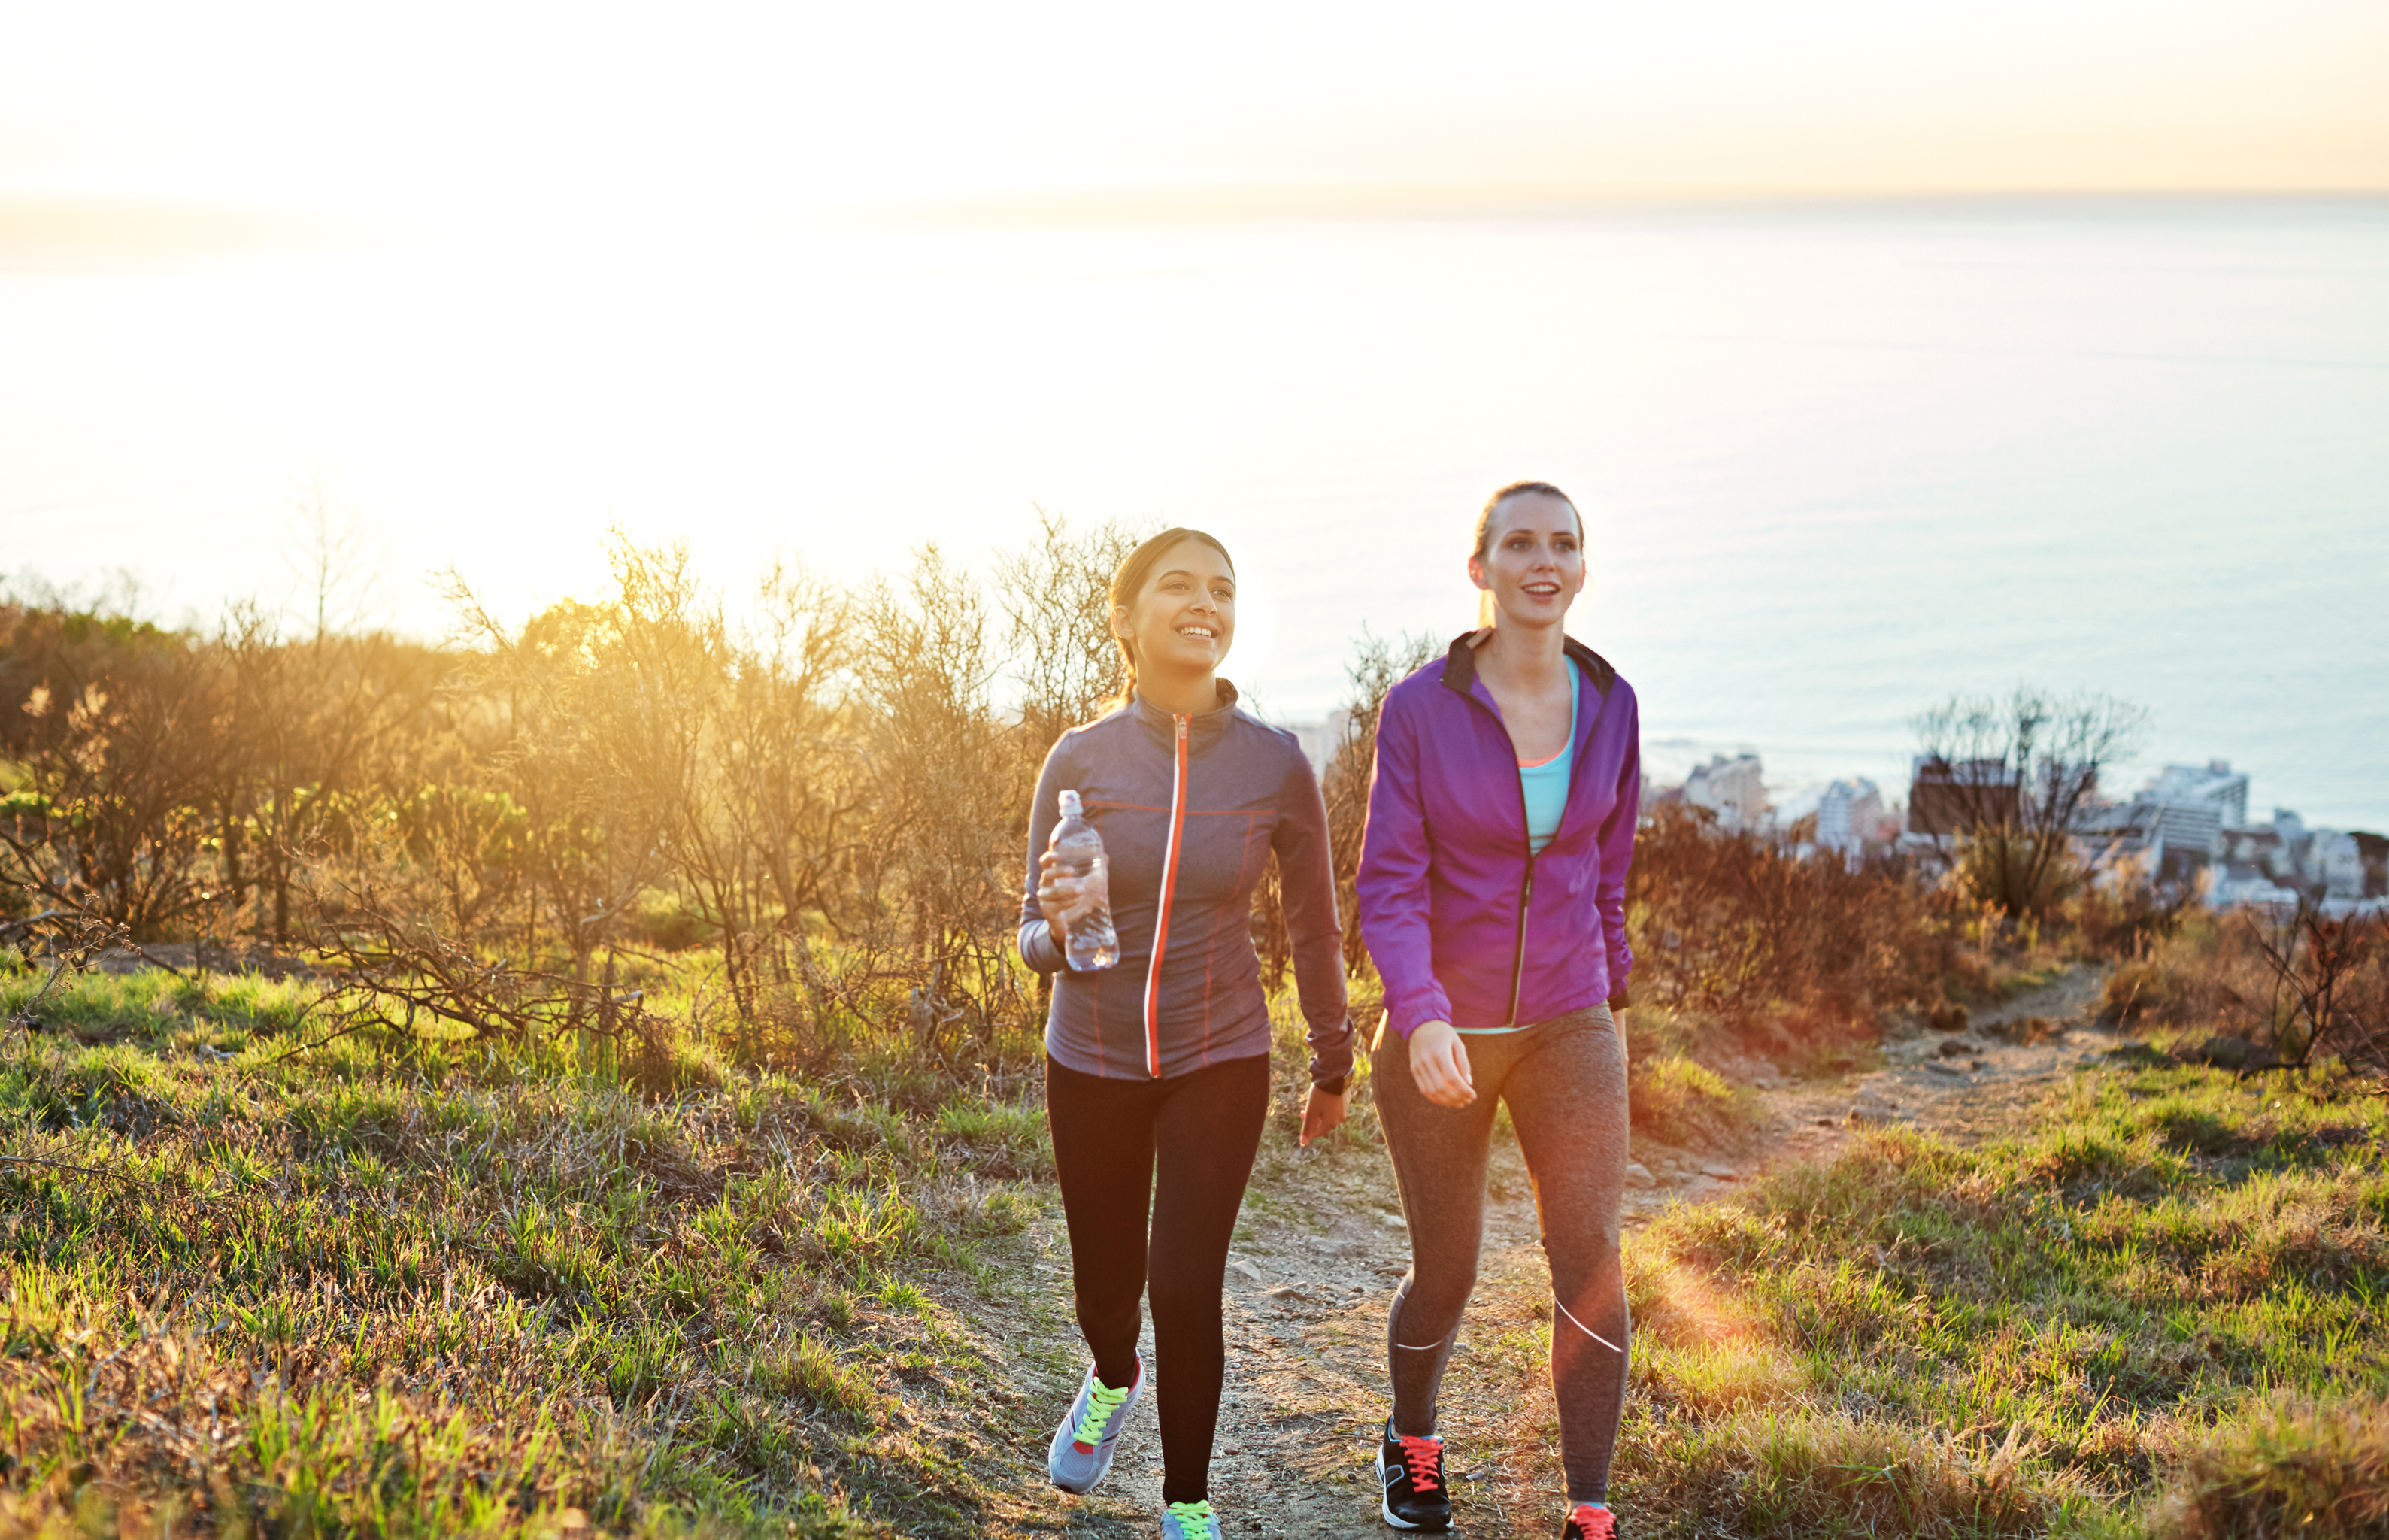 Walking with friends is a health home-run.